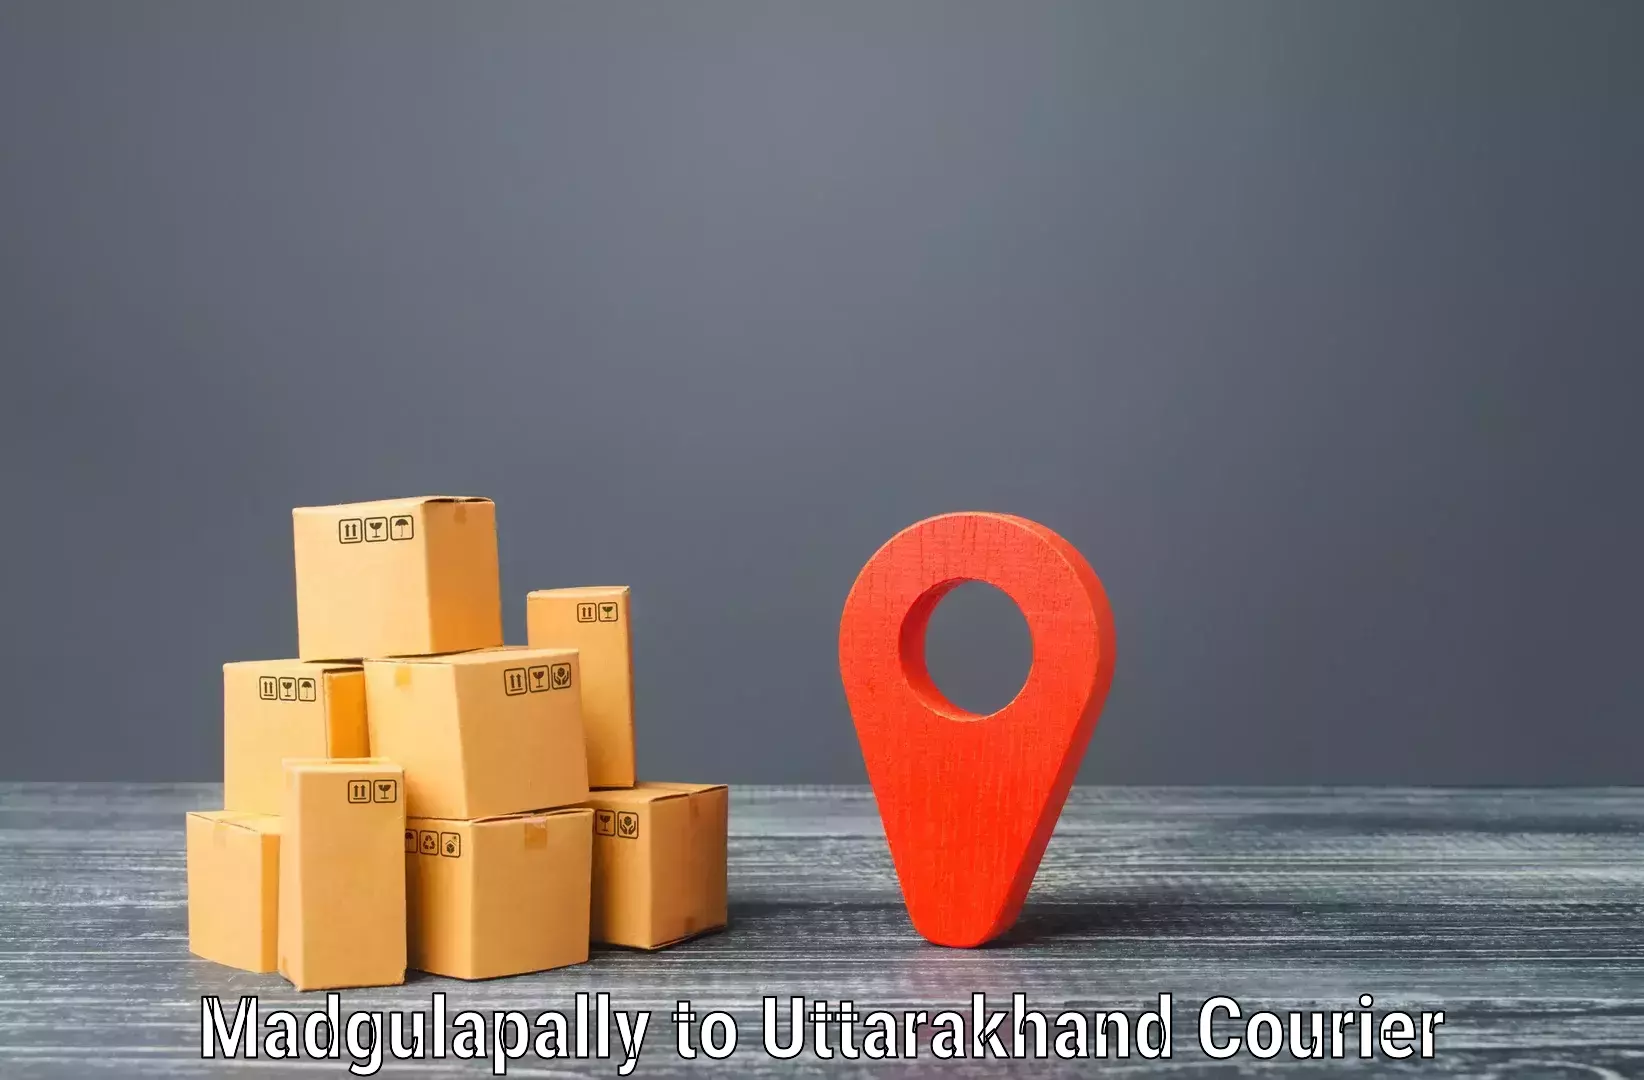 Rapid shipping services Madgulapally to Rishikesh